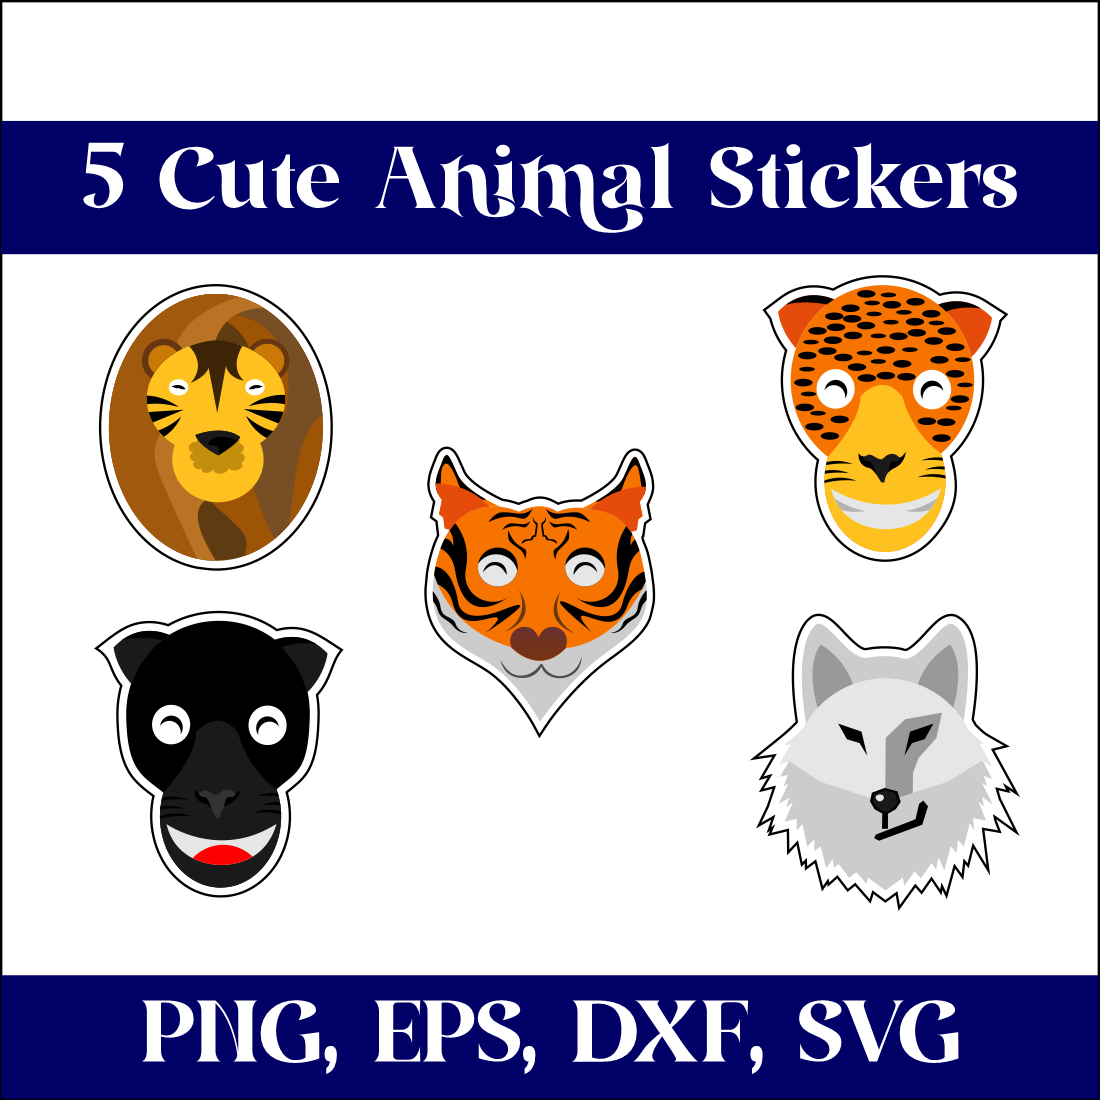 5 Cute Animal Stickers for your cover image.